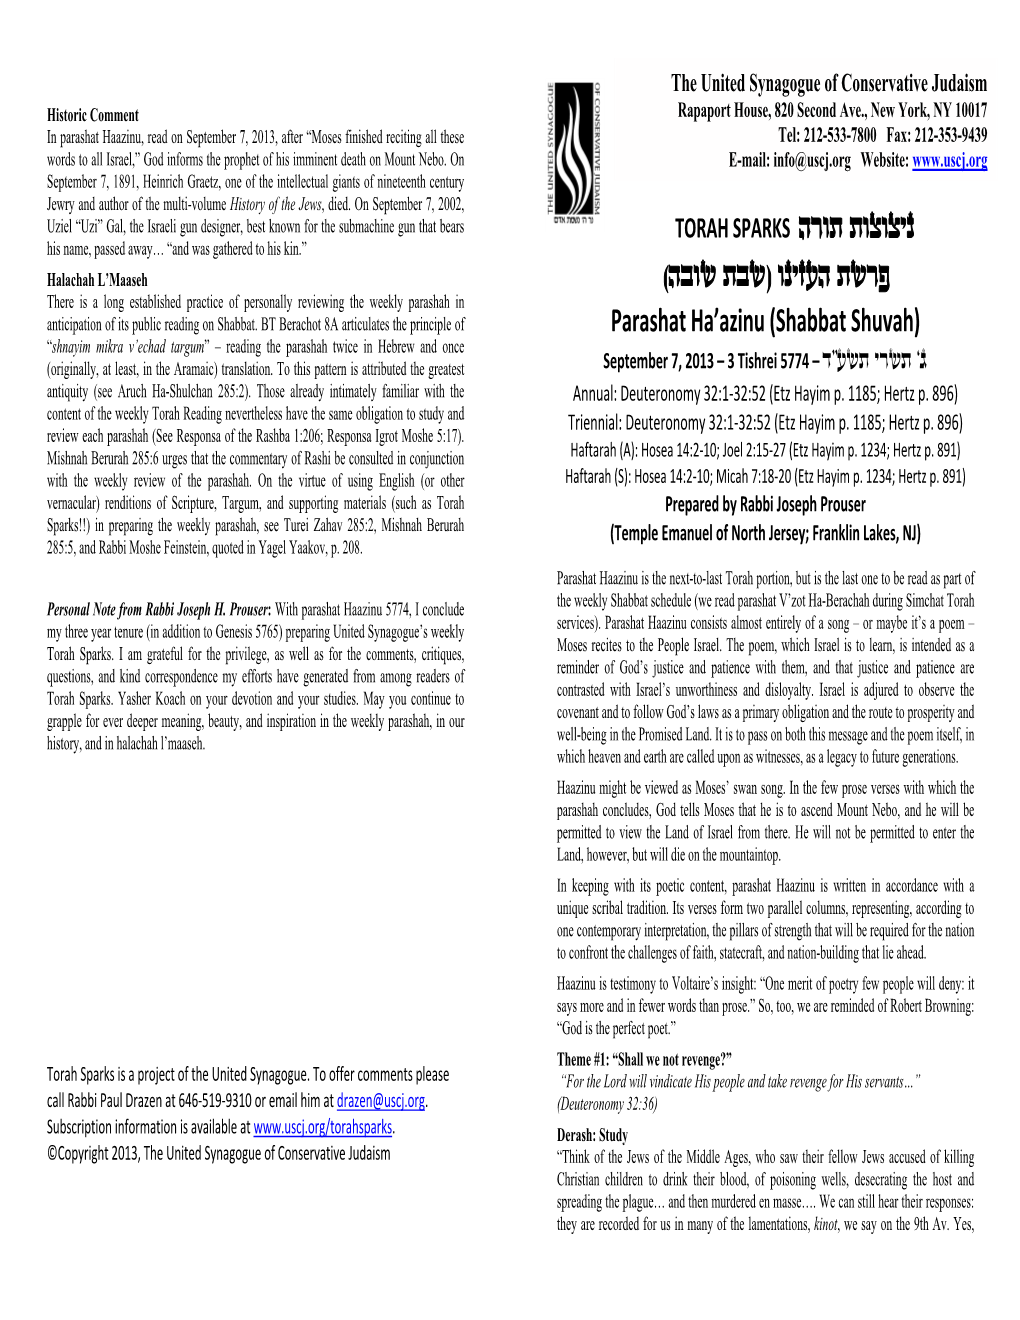 (Vcua ,Ca) Ubhzgv ,Arp There Is a Long Established Practice of Personally Reviewing the Weekly Parashah in Anticipation of Its Public Reading on Shabbat